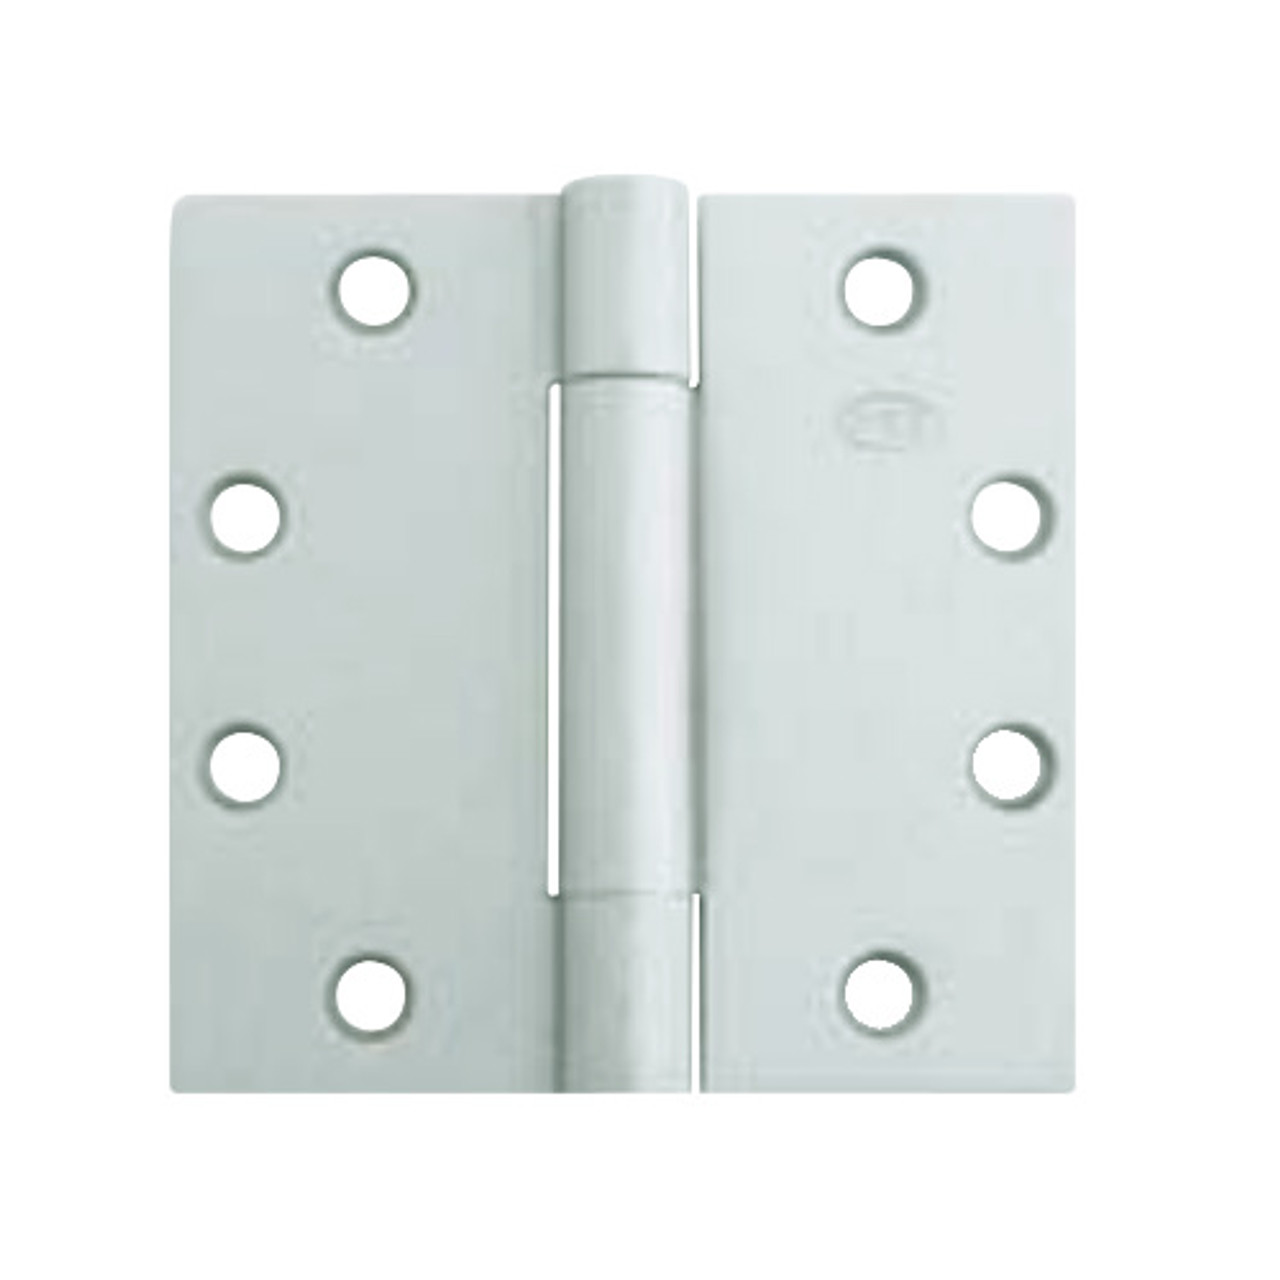 3CB1-5x4-5-646-TW4 IVES 3 Knuckle Concealed Bearing Full Mortise Hinge with Electric Thru-Wire in Satin Nickel Plated